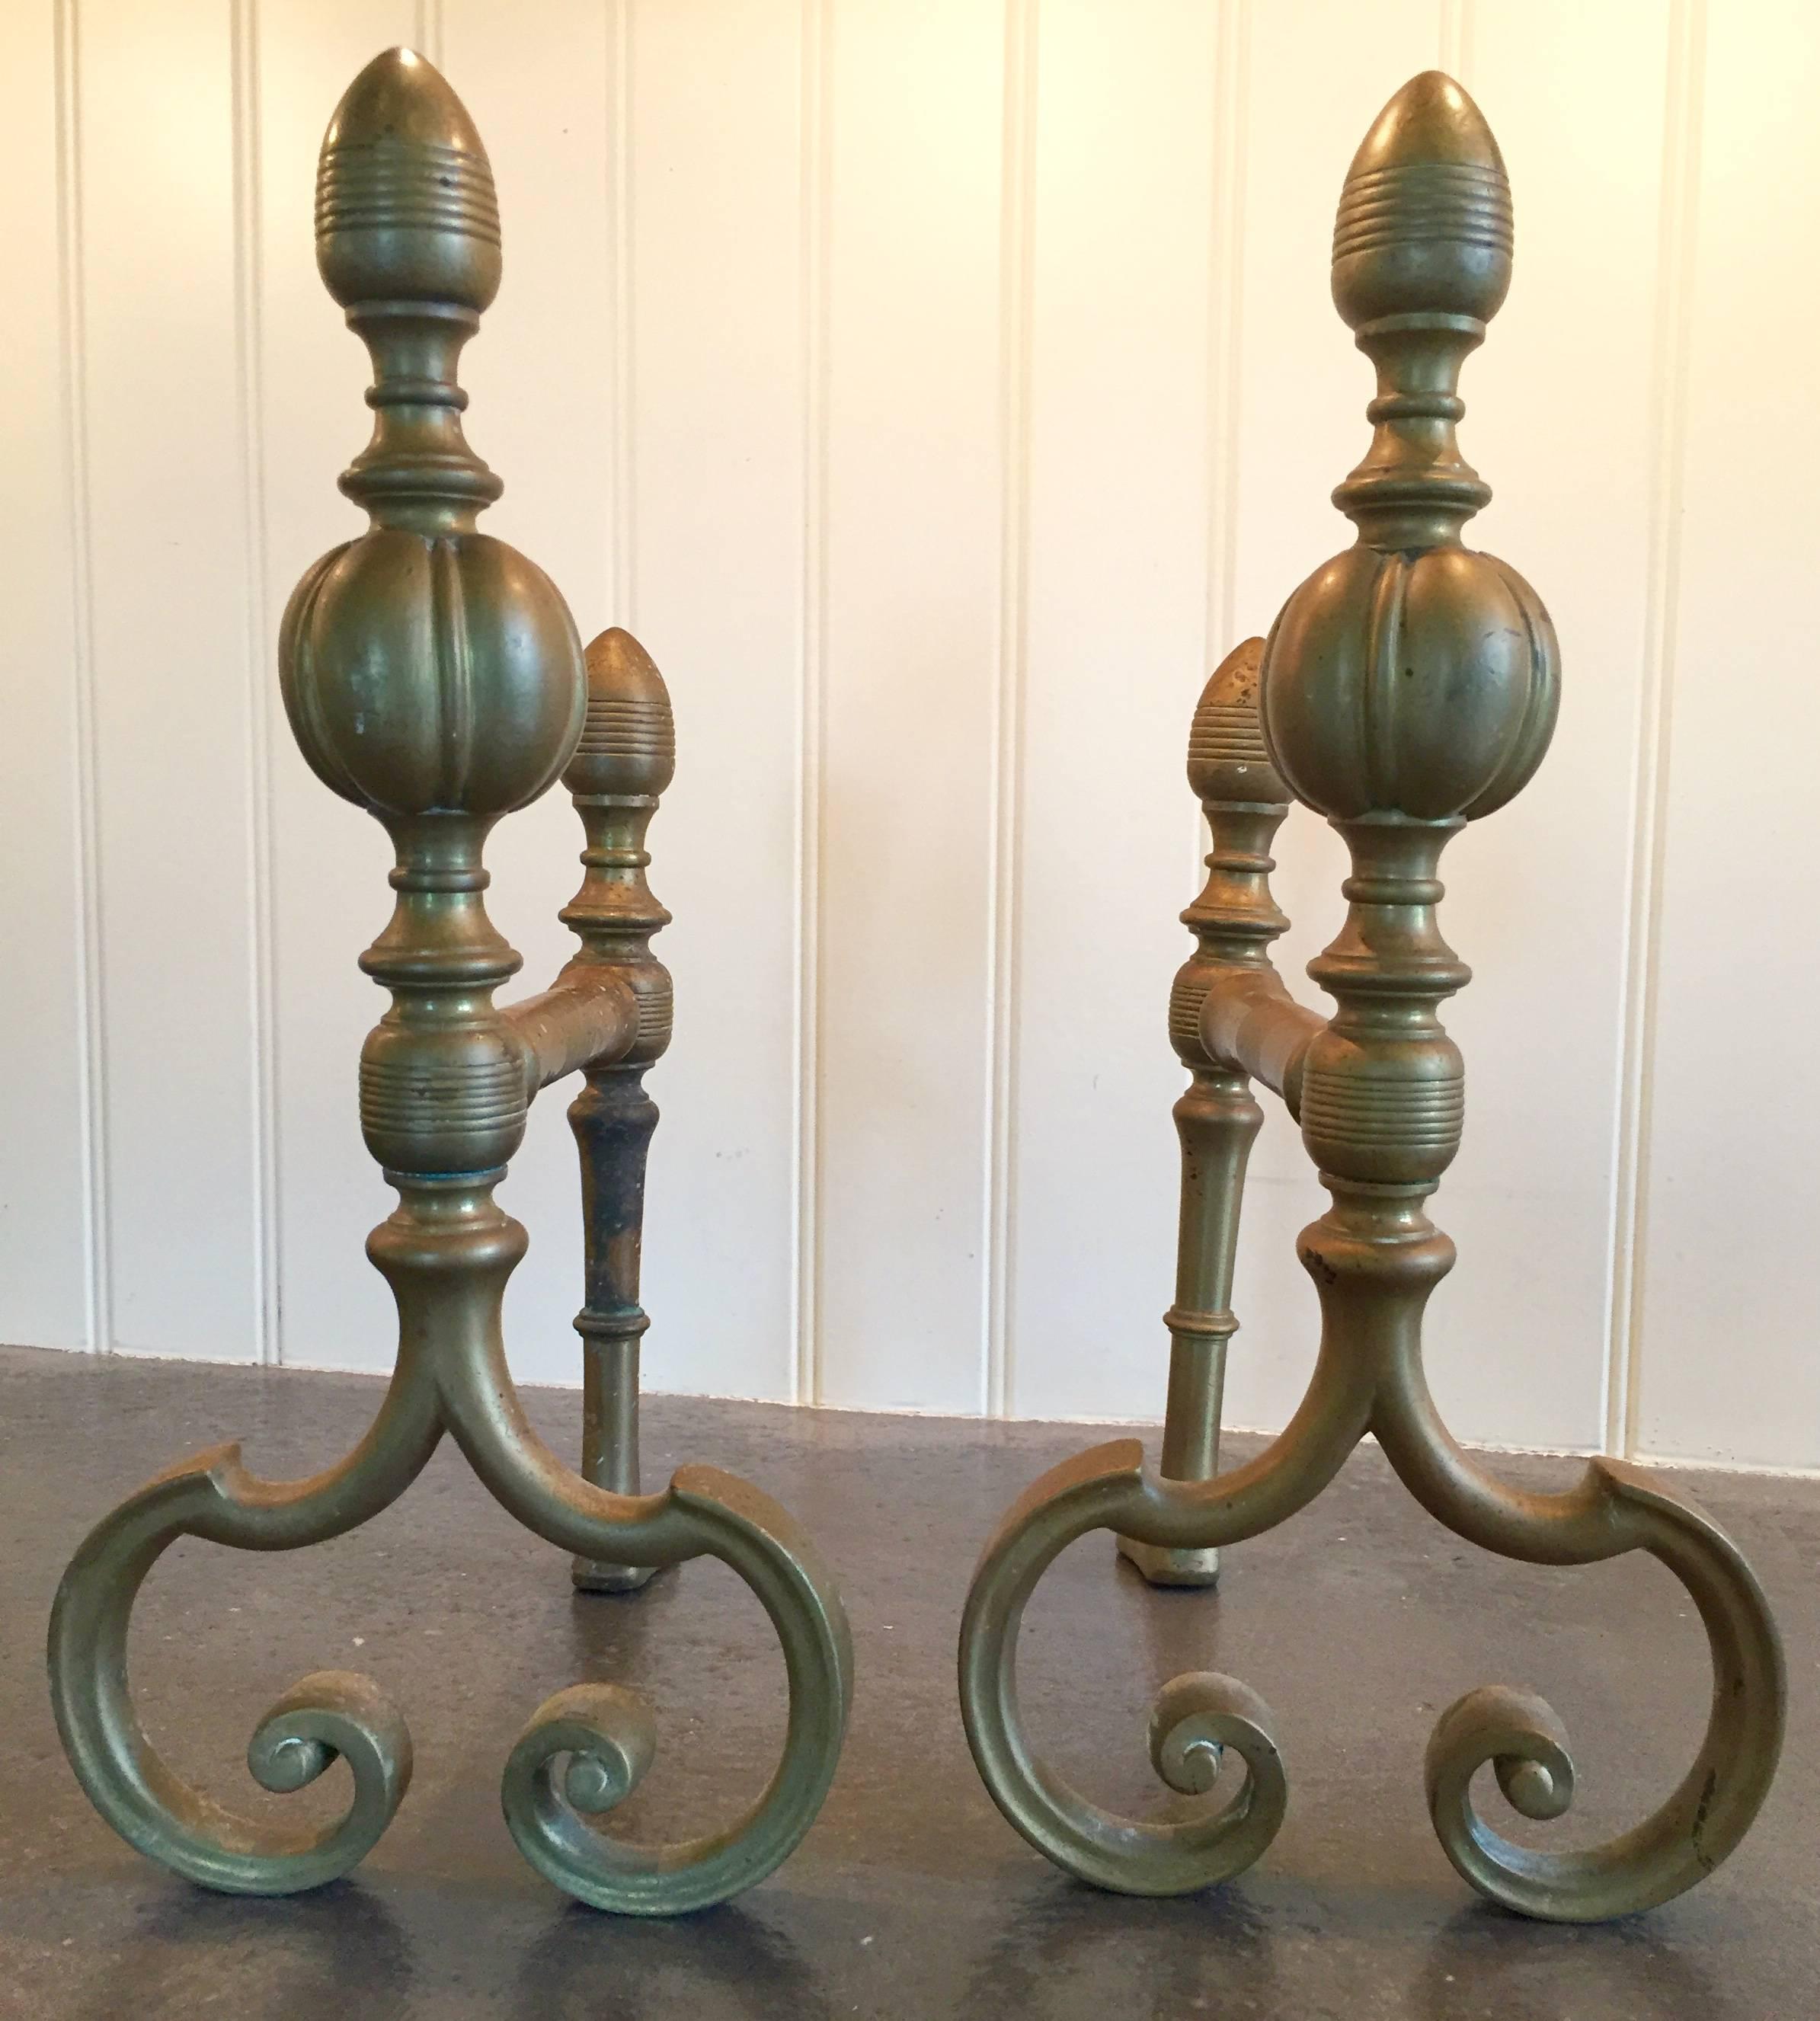 These petite brass andirons are actually fireplace tool holders (see last photo), but could of course function as decorative andirons.
They most likely date from the 1800s, though the scrolled base is reminiscent of designs invented during the